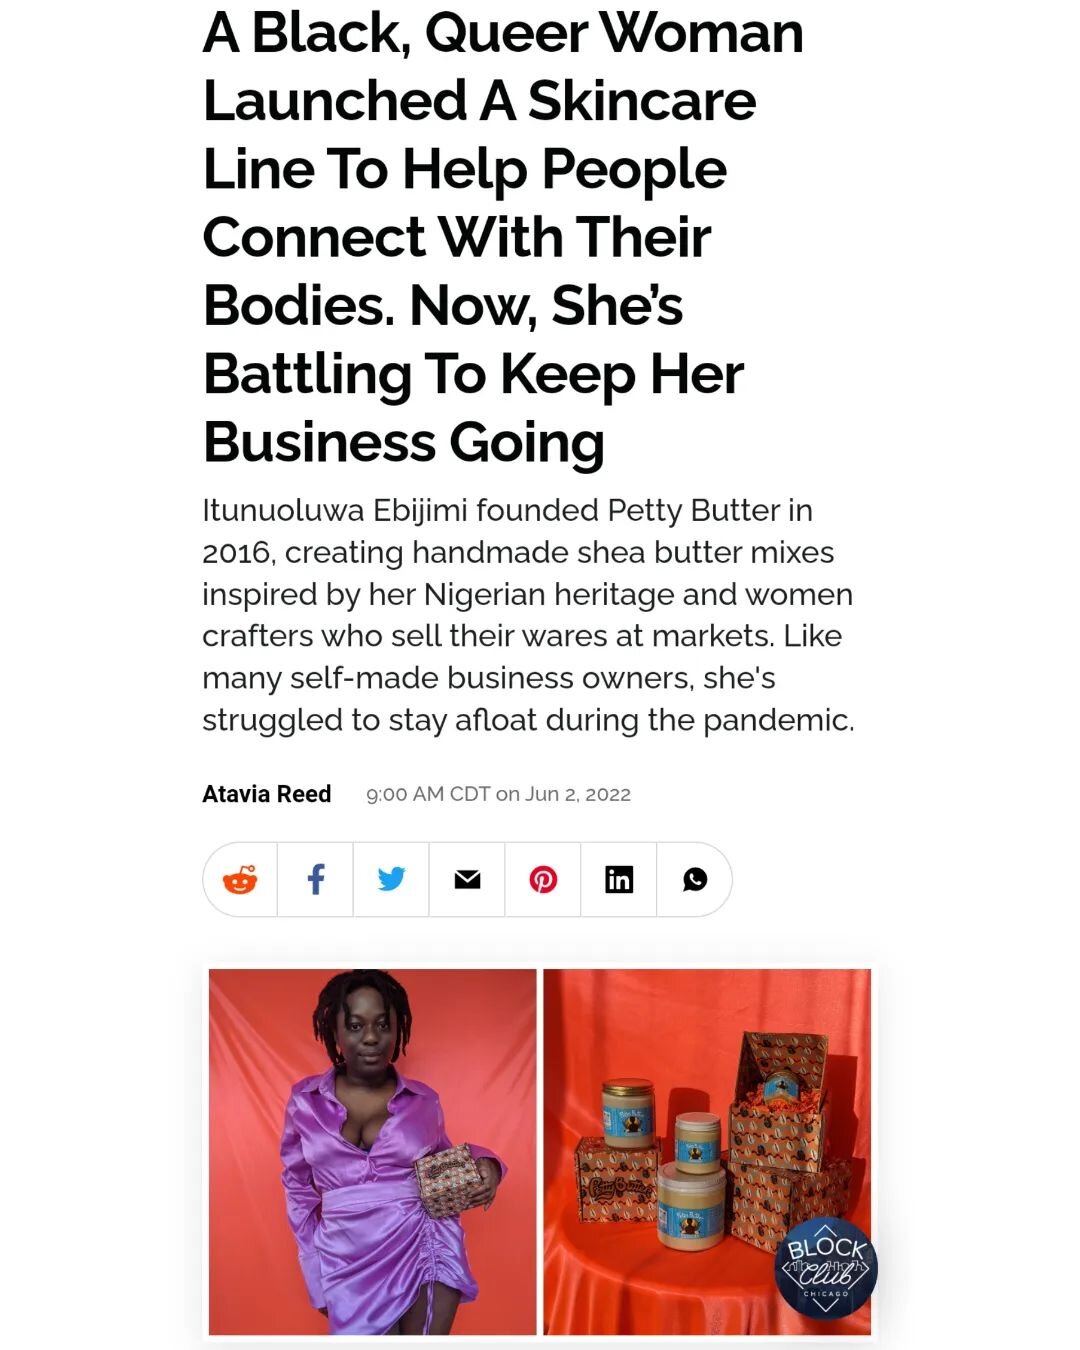 Thank you @blockclubchi and Atavia Reed for writing Petty Butter in your Pride newsletter!

When I was asked to do this interview, I didn't want to present a fluff story about my small business and entrepreneurial life. I talked about my issues with 